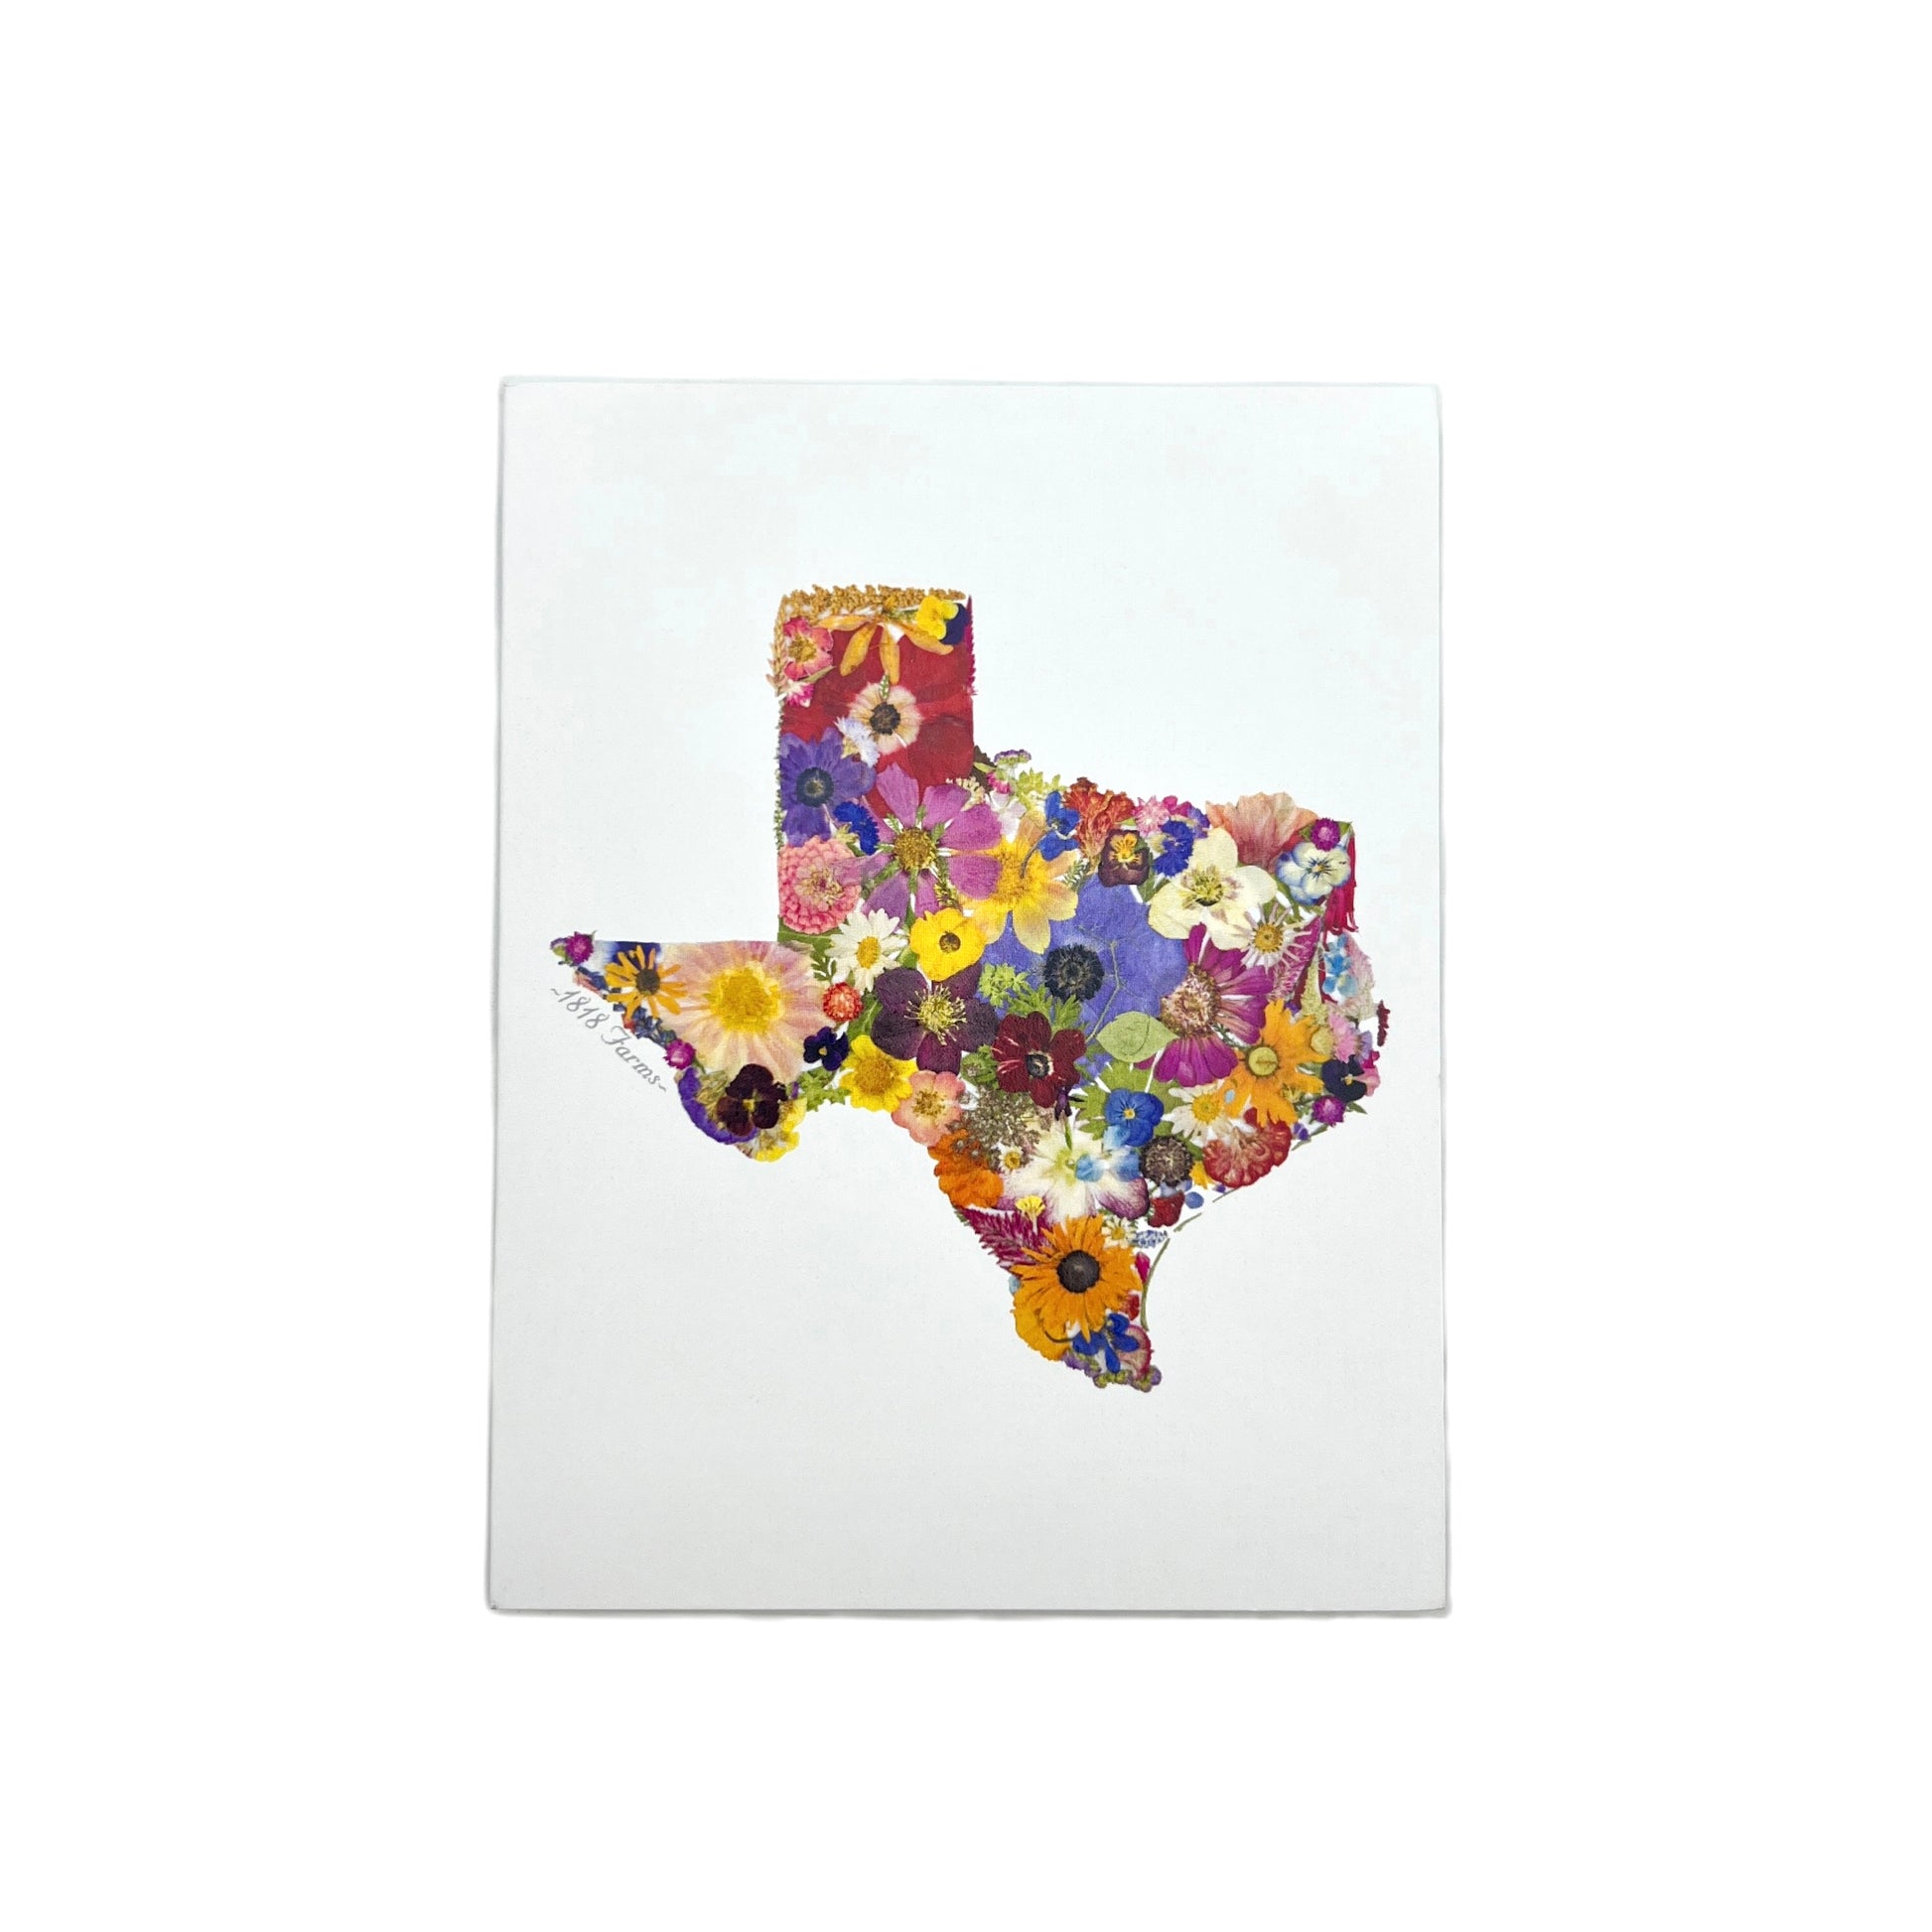 State Themed Notecards (Set of 6) Featuring Dried, Pressed Flowers - "Where I Bloom" Collection Notecard 1818 Farms Texas  